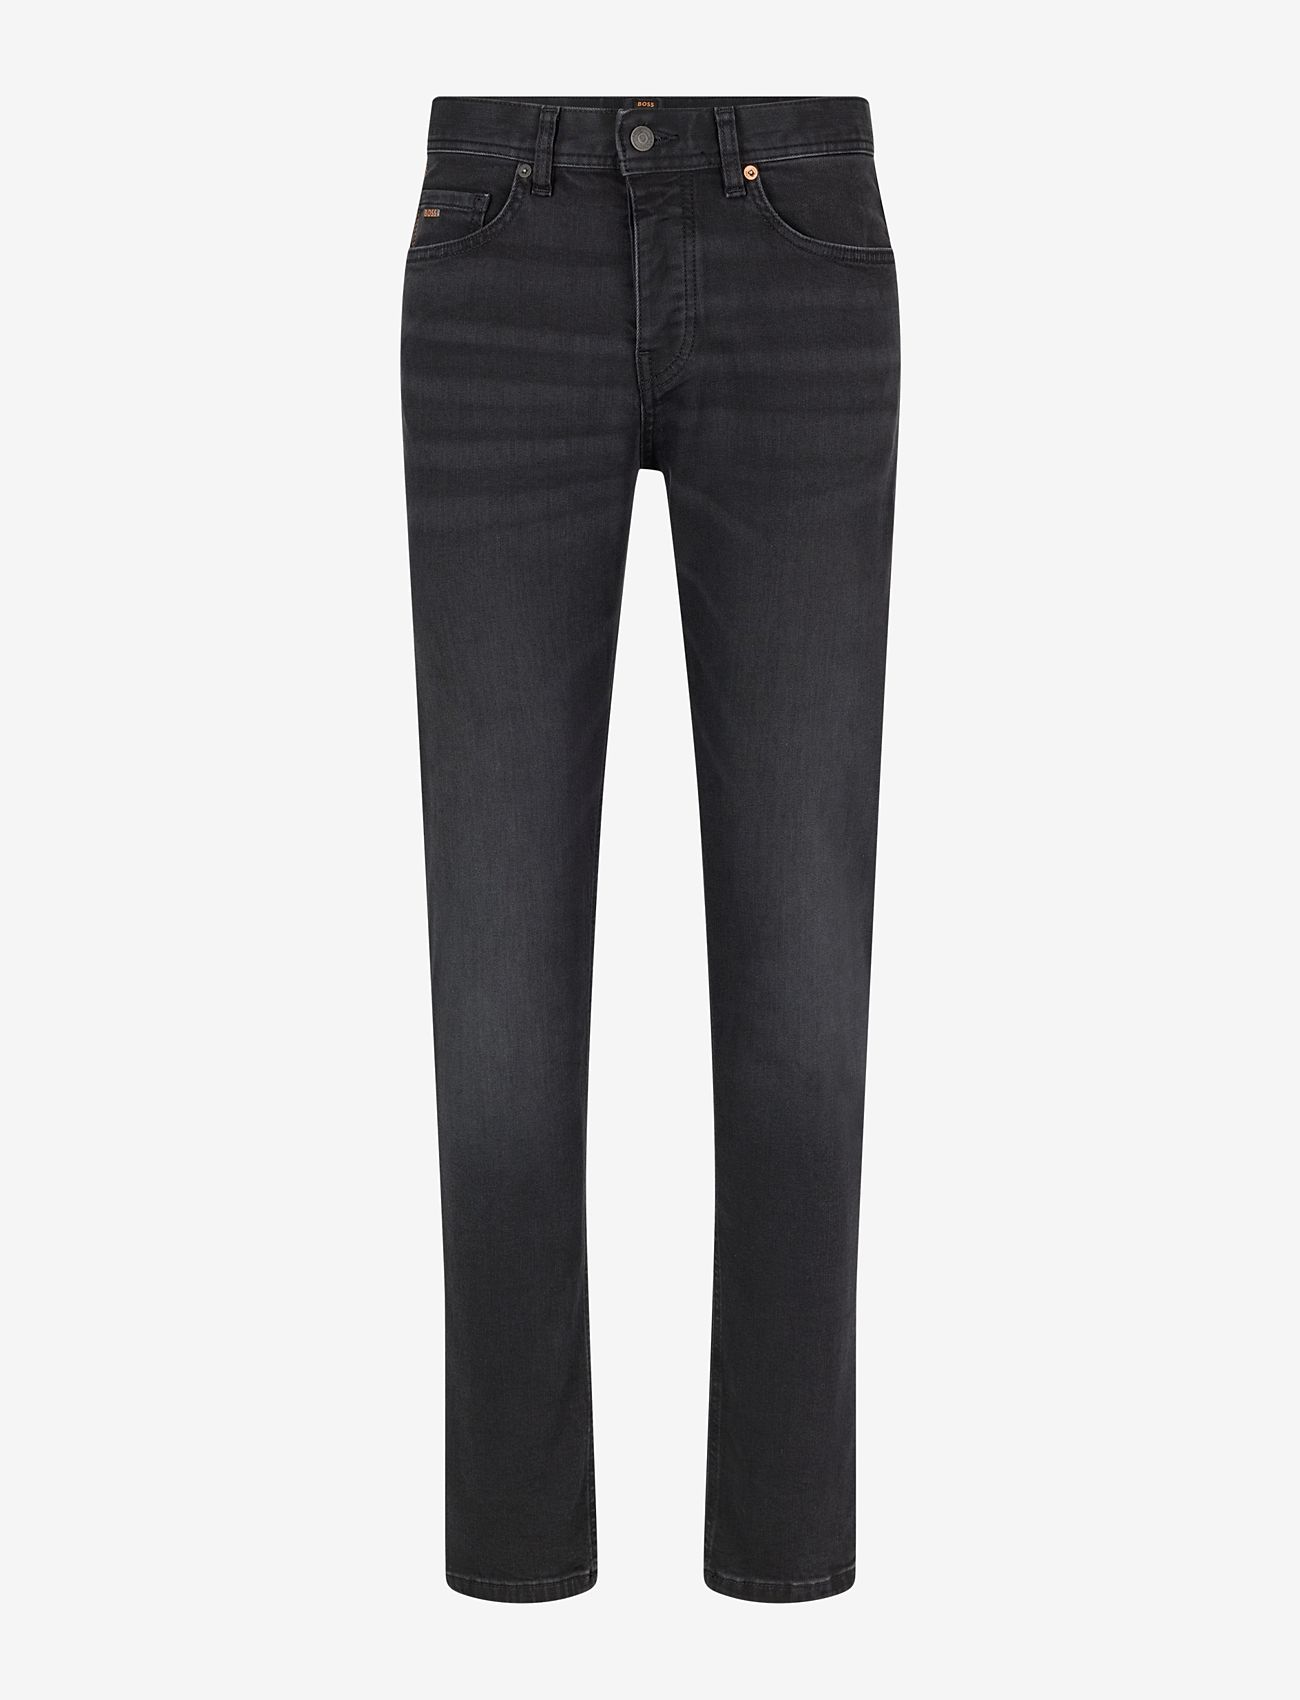 BOSS - Taber BC-P-1 - tapered jeans - black - 0